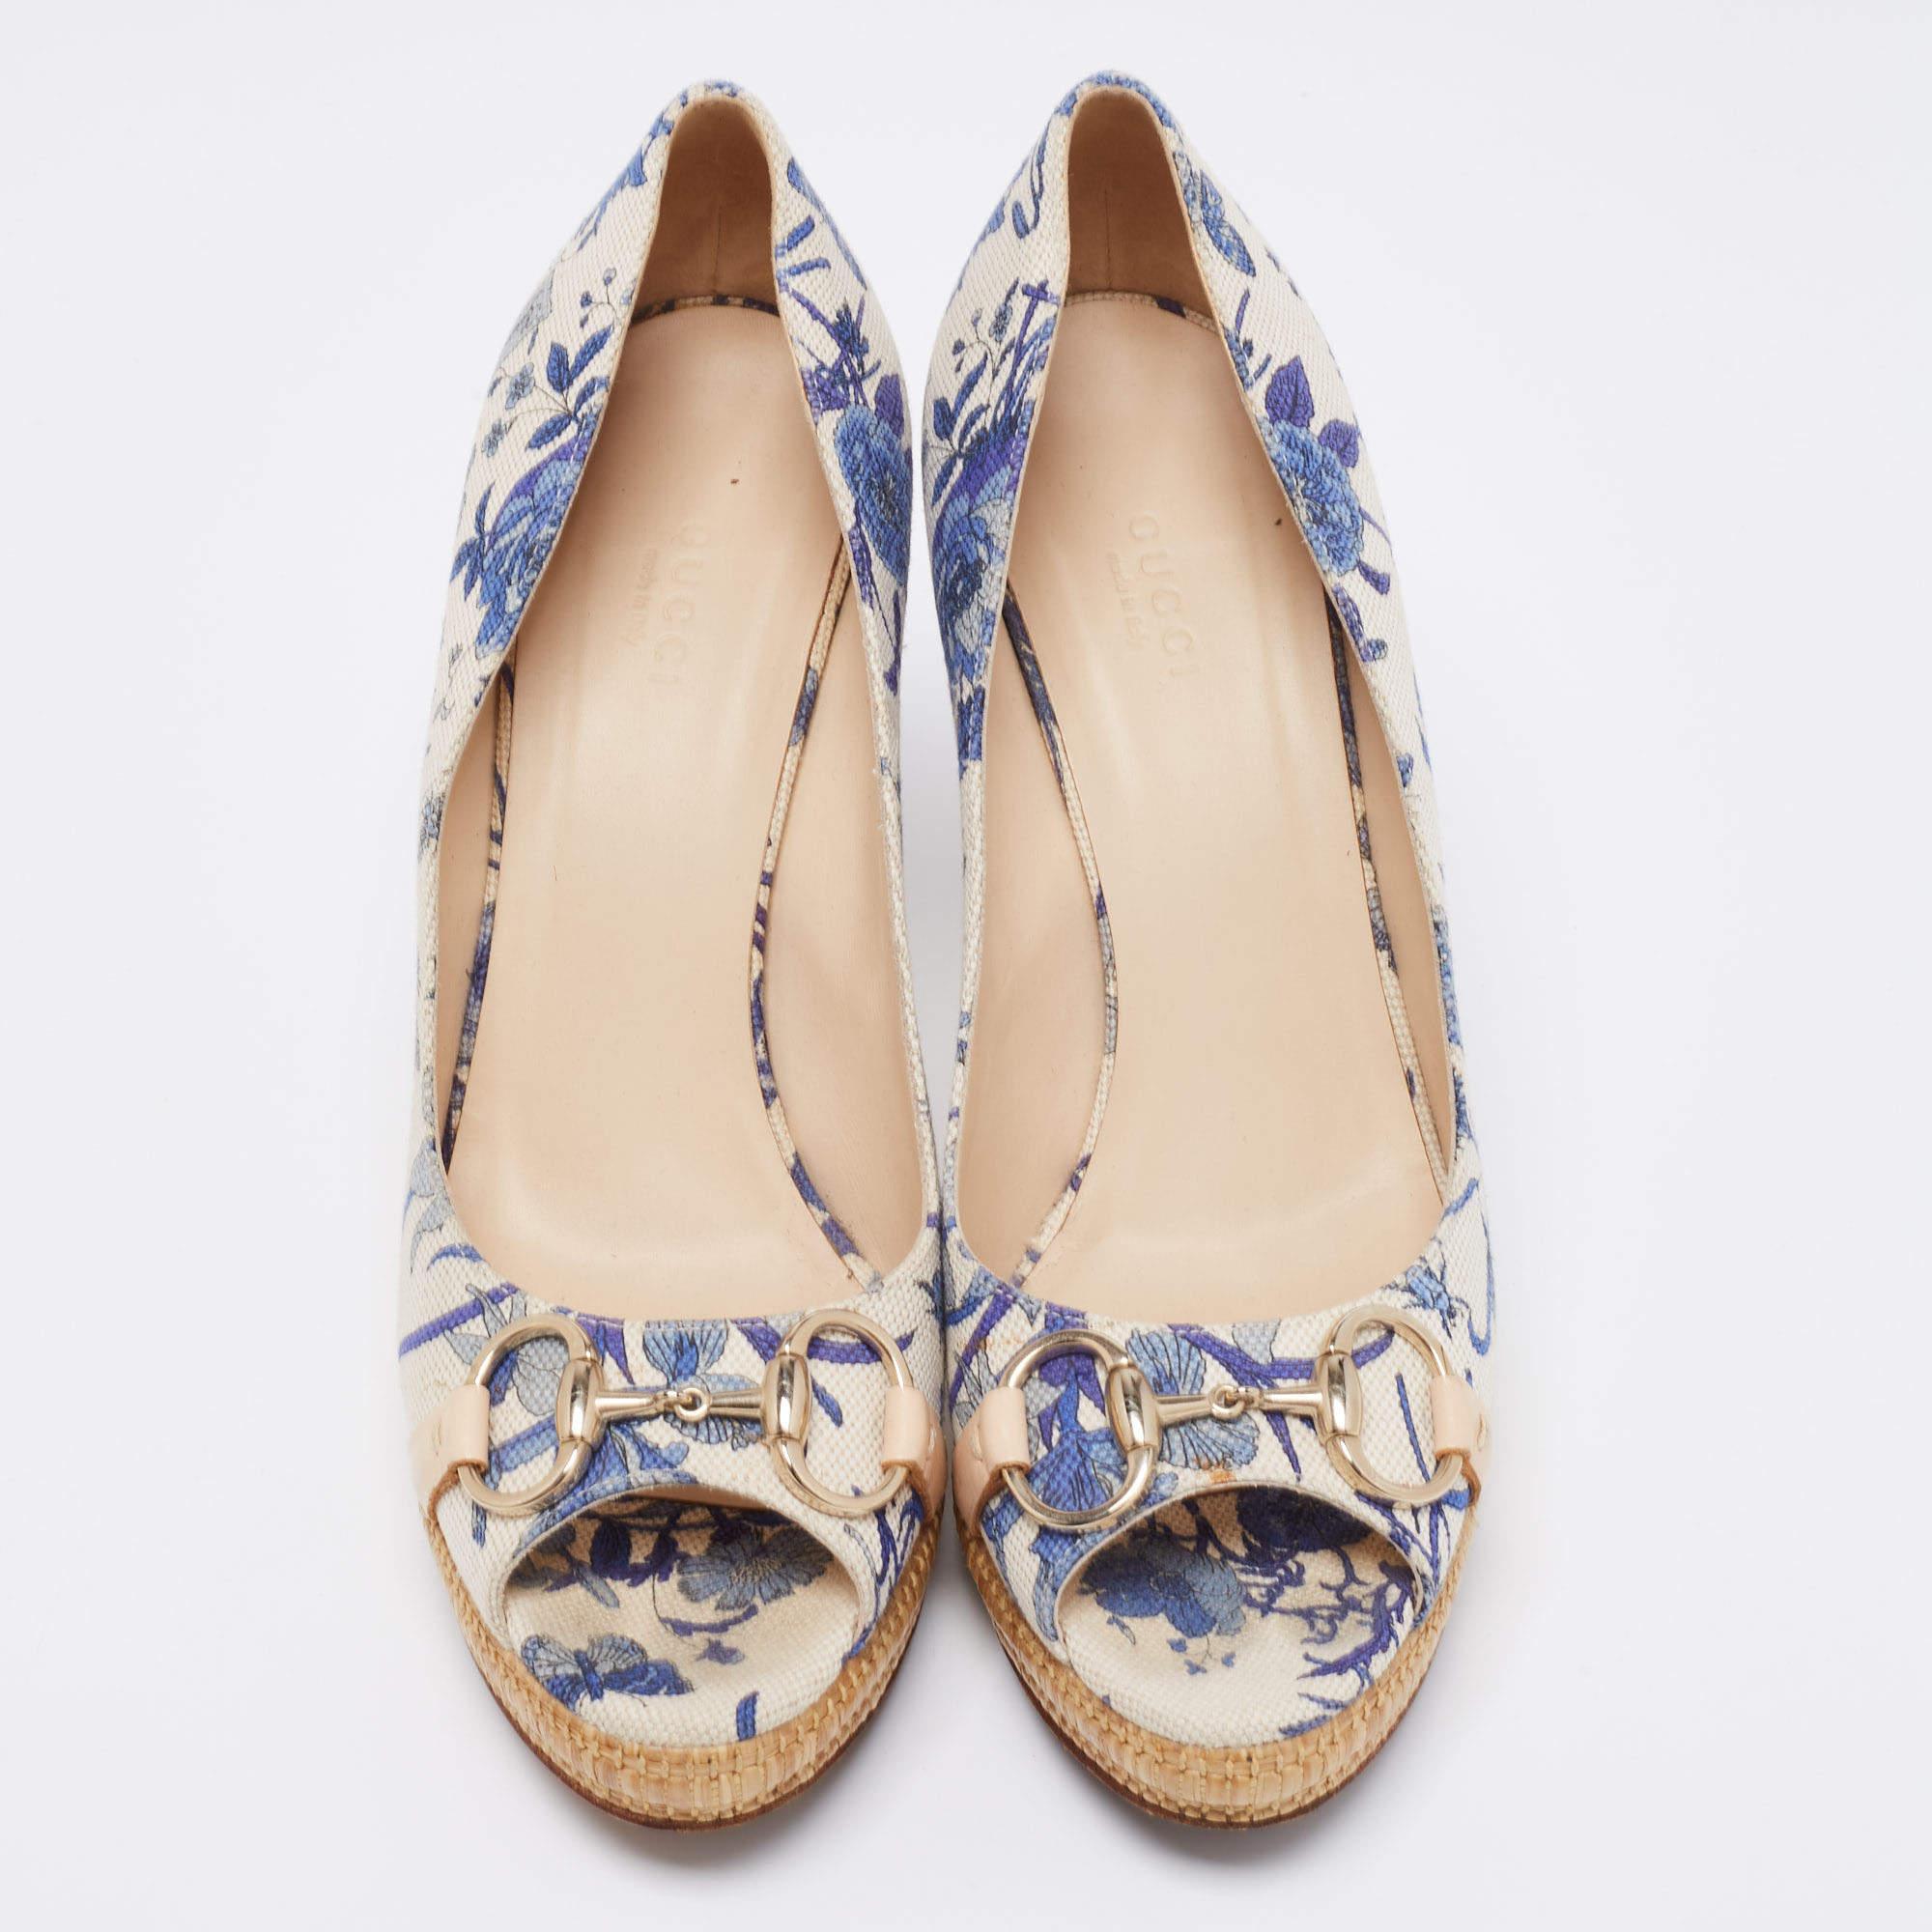 Adorned with a beautiful floral print and Gucci's aesthetics, these pumps will grant your feet unending charm, femininity, and poise! They are crafted using white-blue canvas, with gold-tone Horsebit motifs perched on the peep-toes. They have a